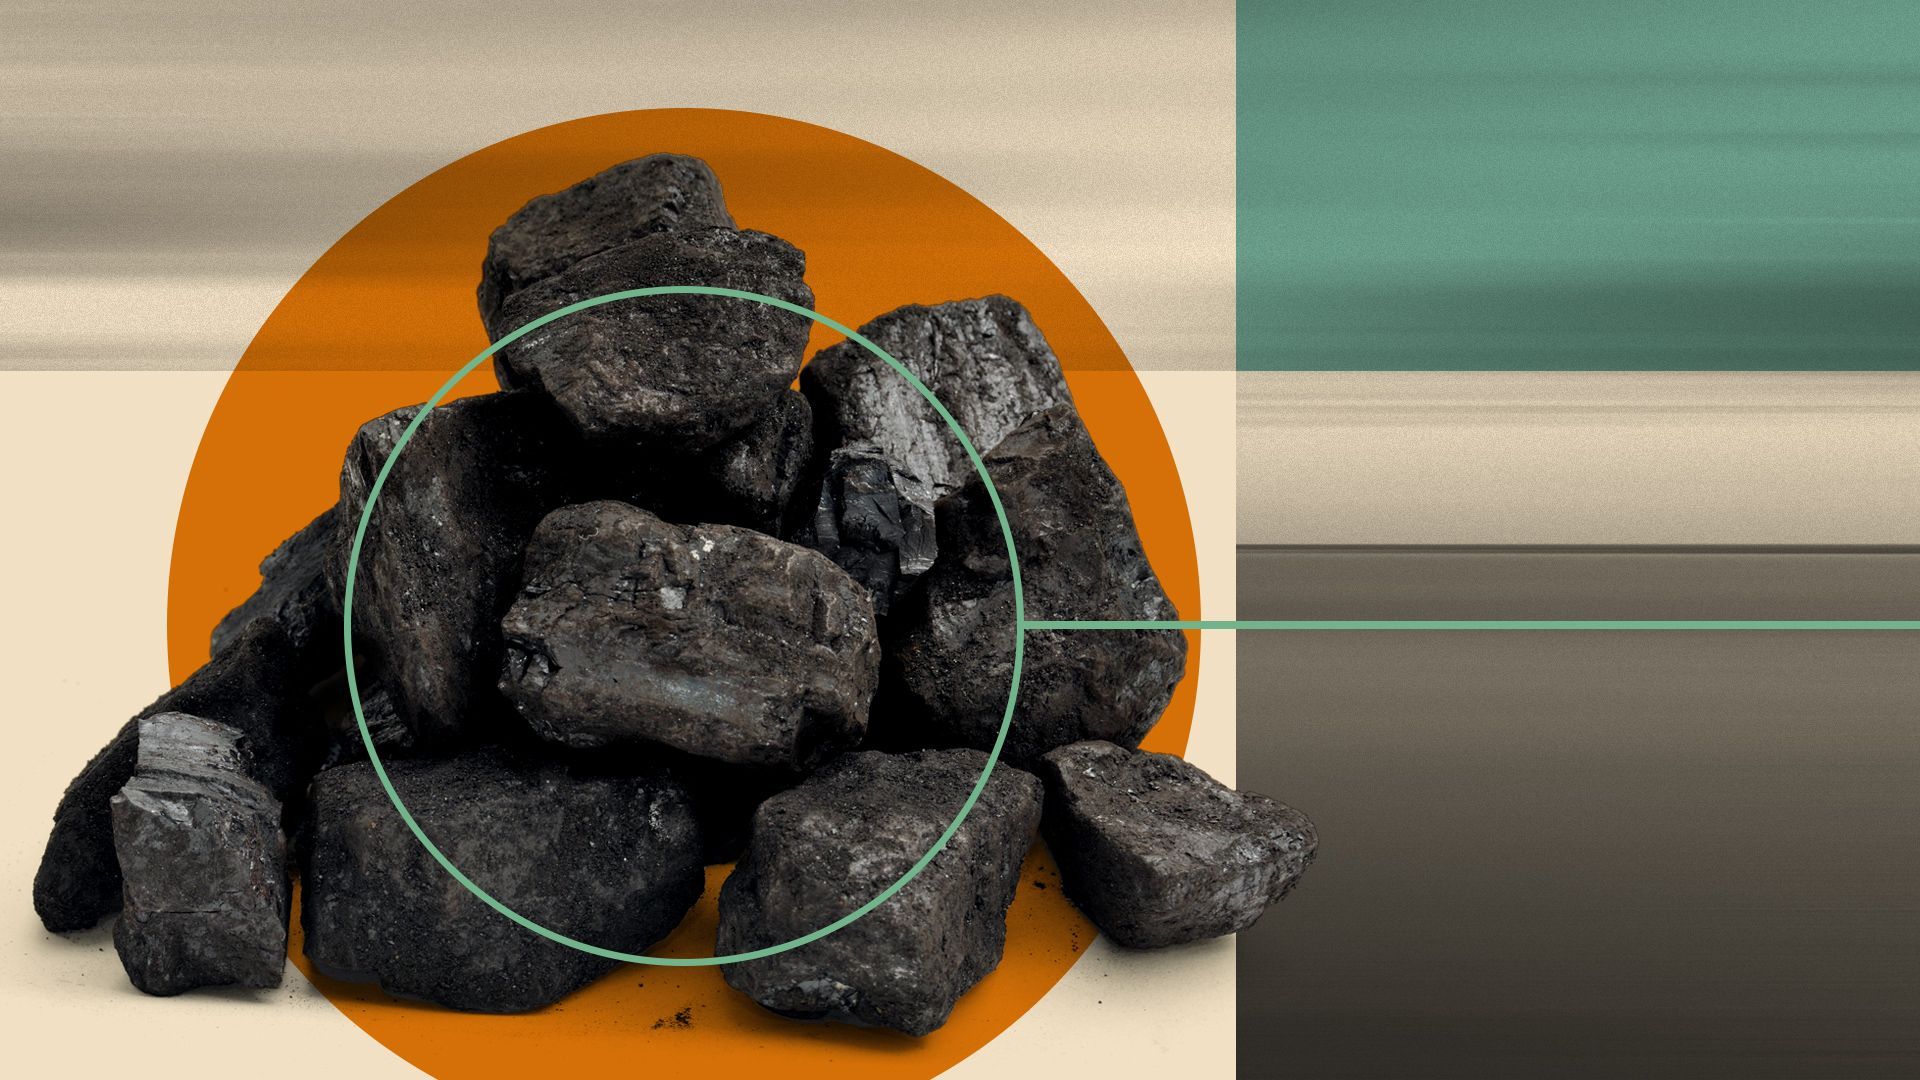 Illustration of a mound of coal overlaid on a horizon with abstract shapes.